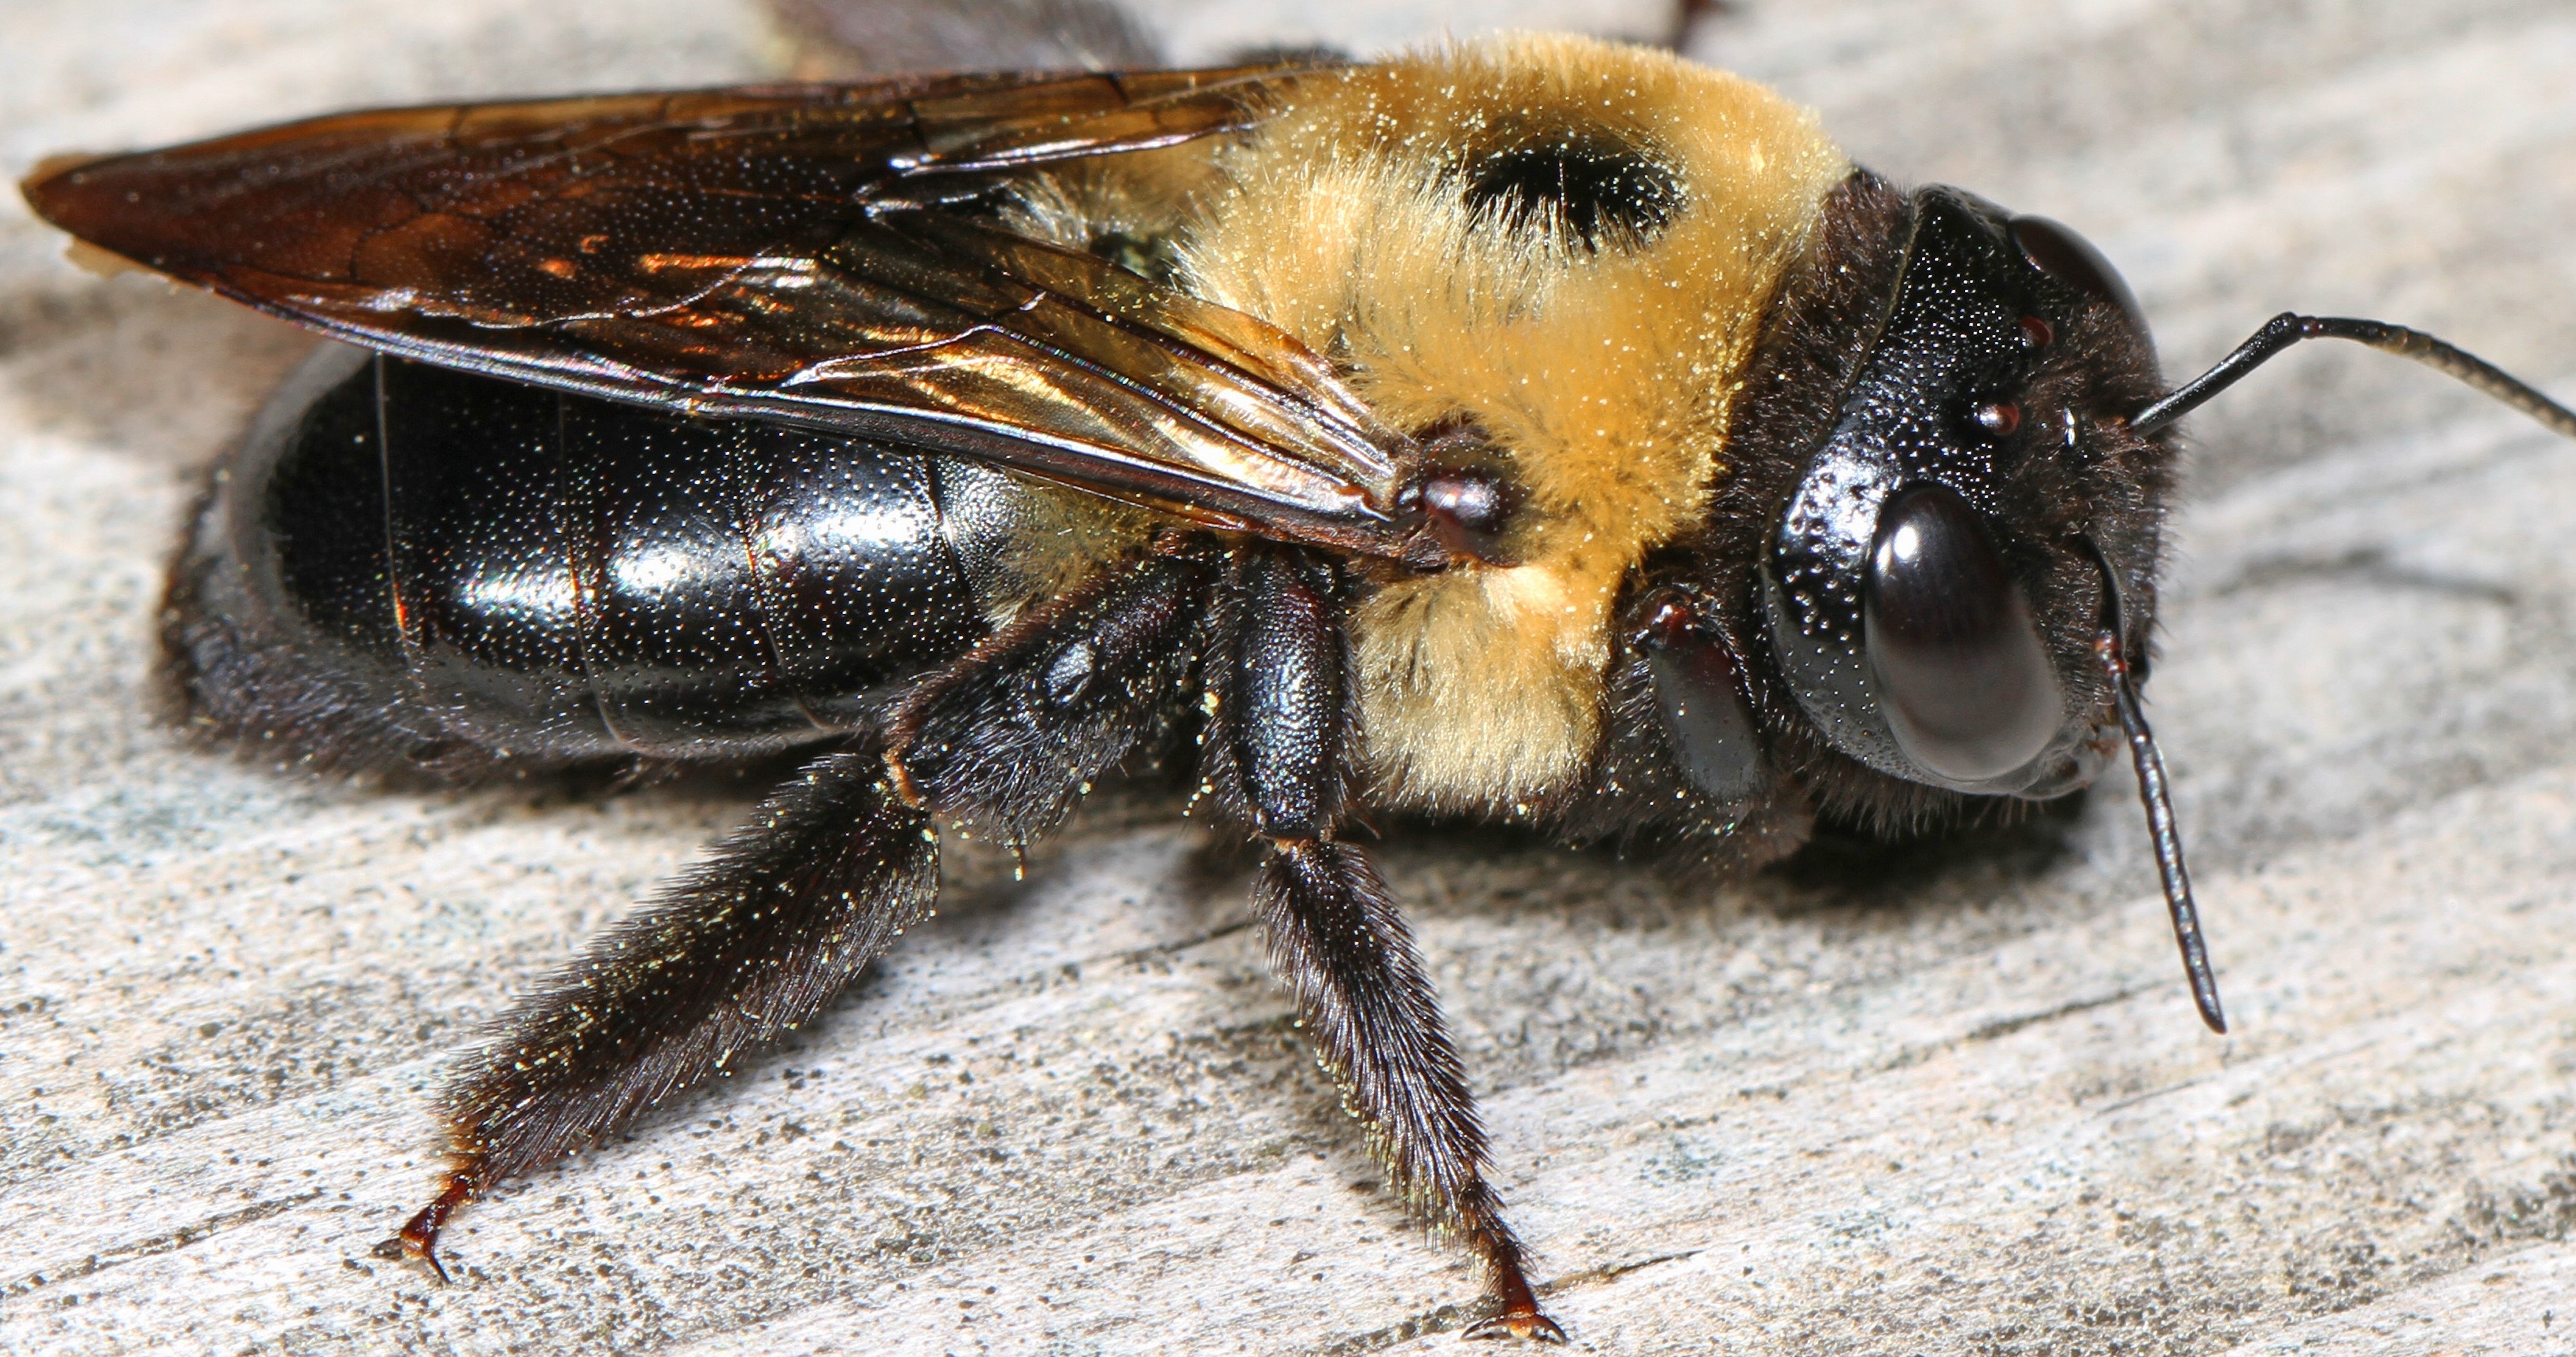 Eastern Carpenter Bee, photographed by Judy Gallagher, licensed with Creative Commons